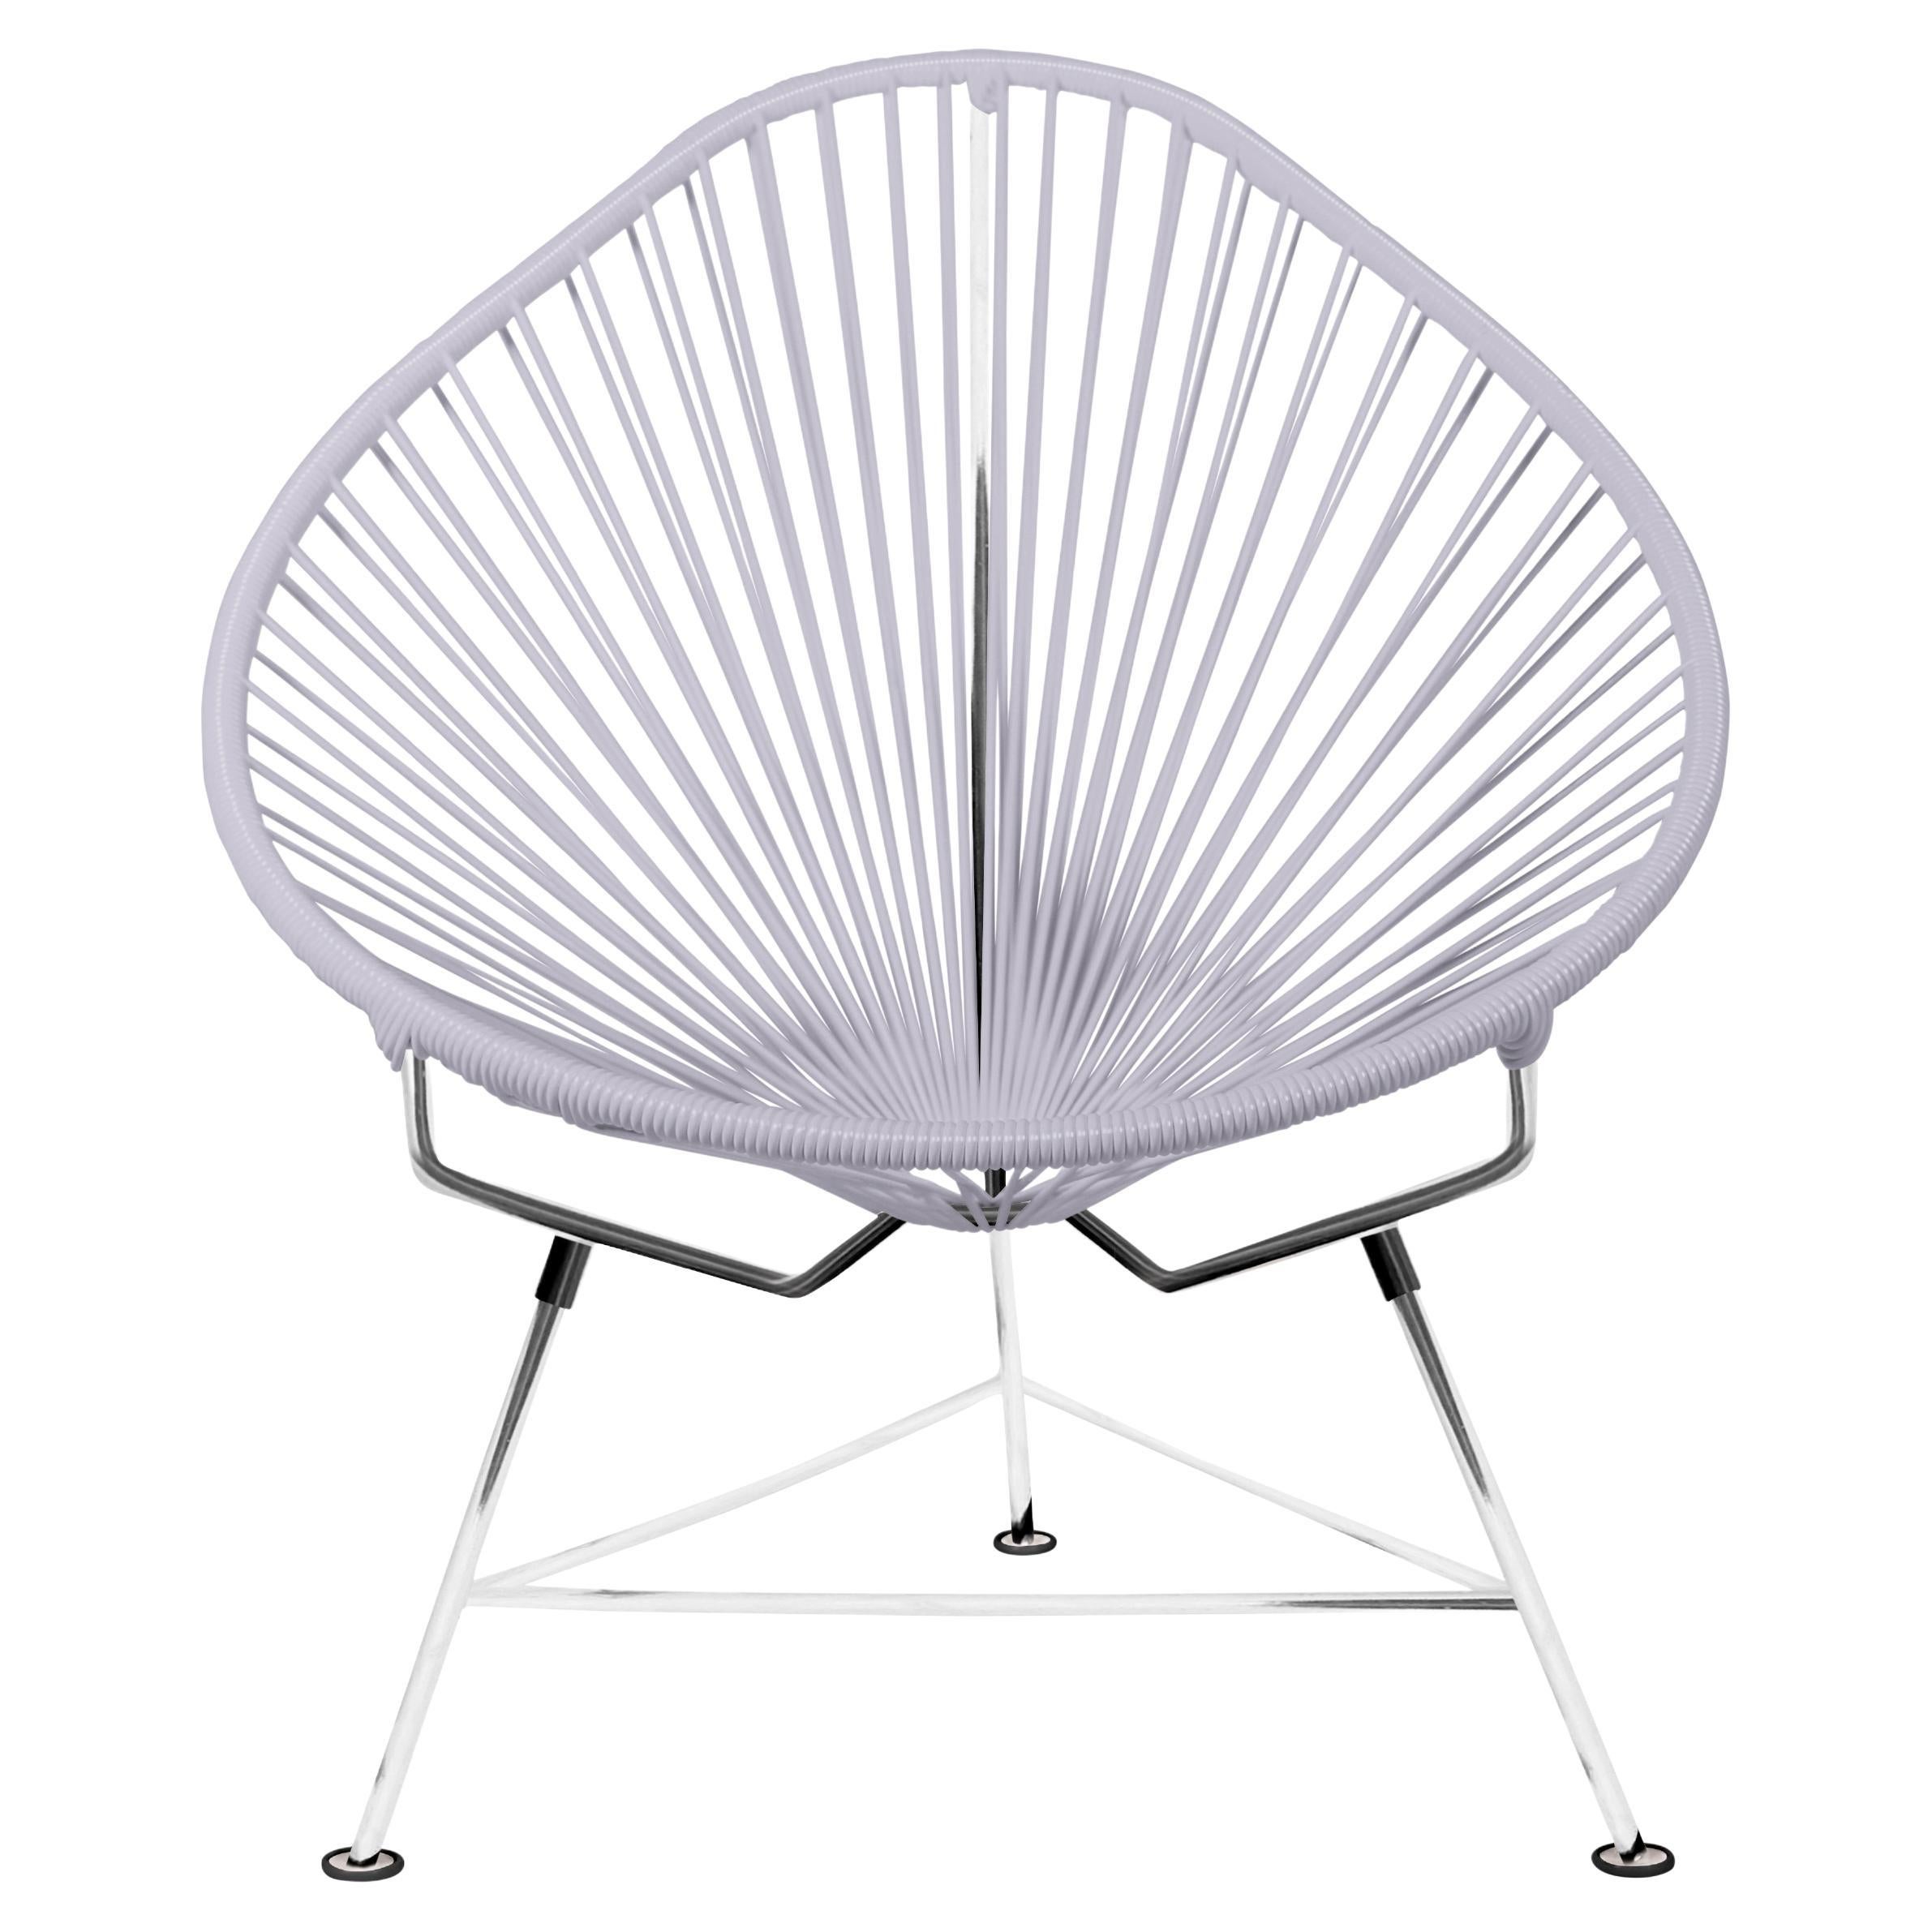 Innit Designs Acapulco Chair Clear Weave on Chrome Frame